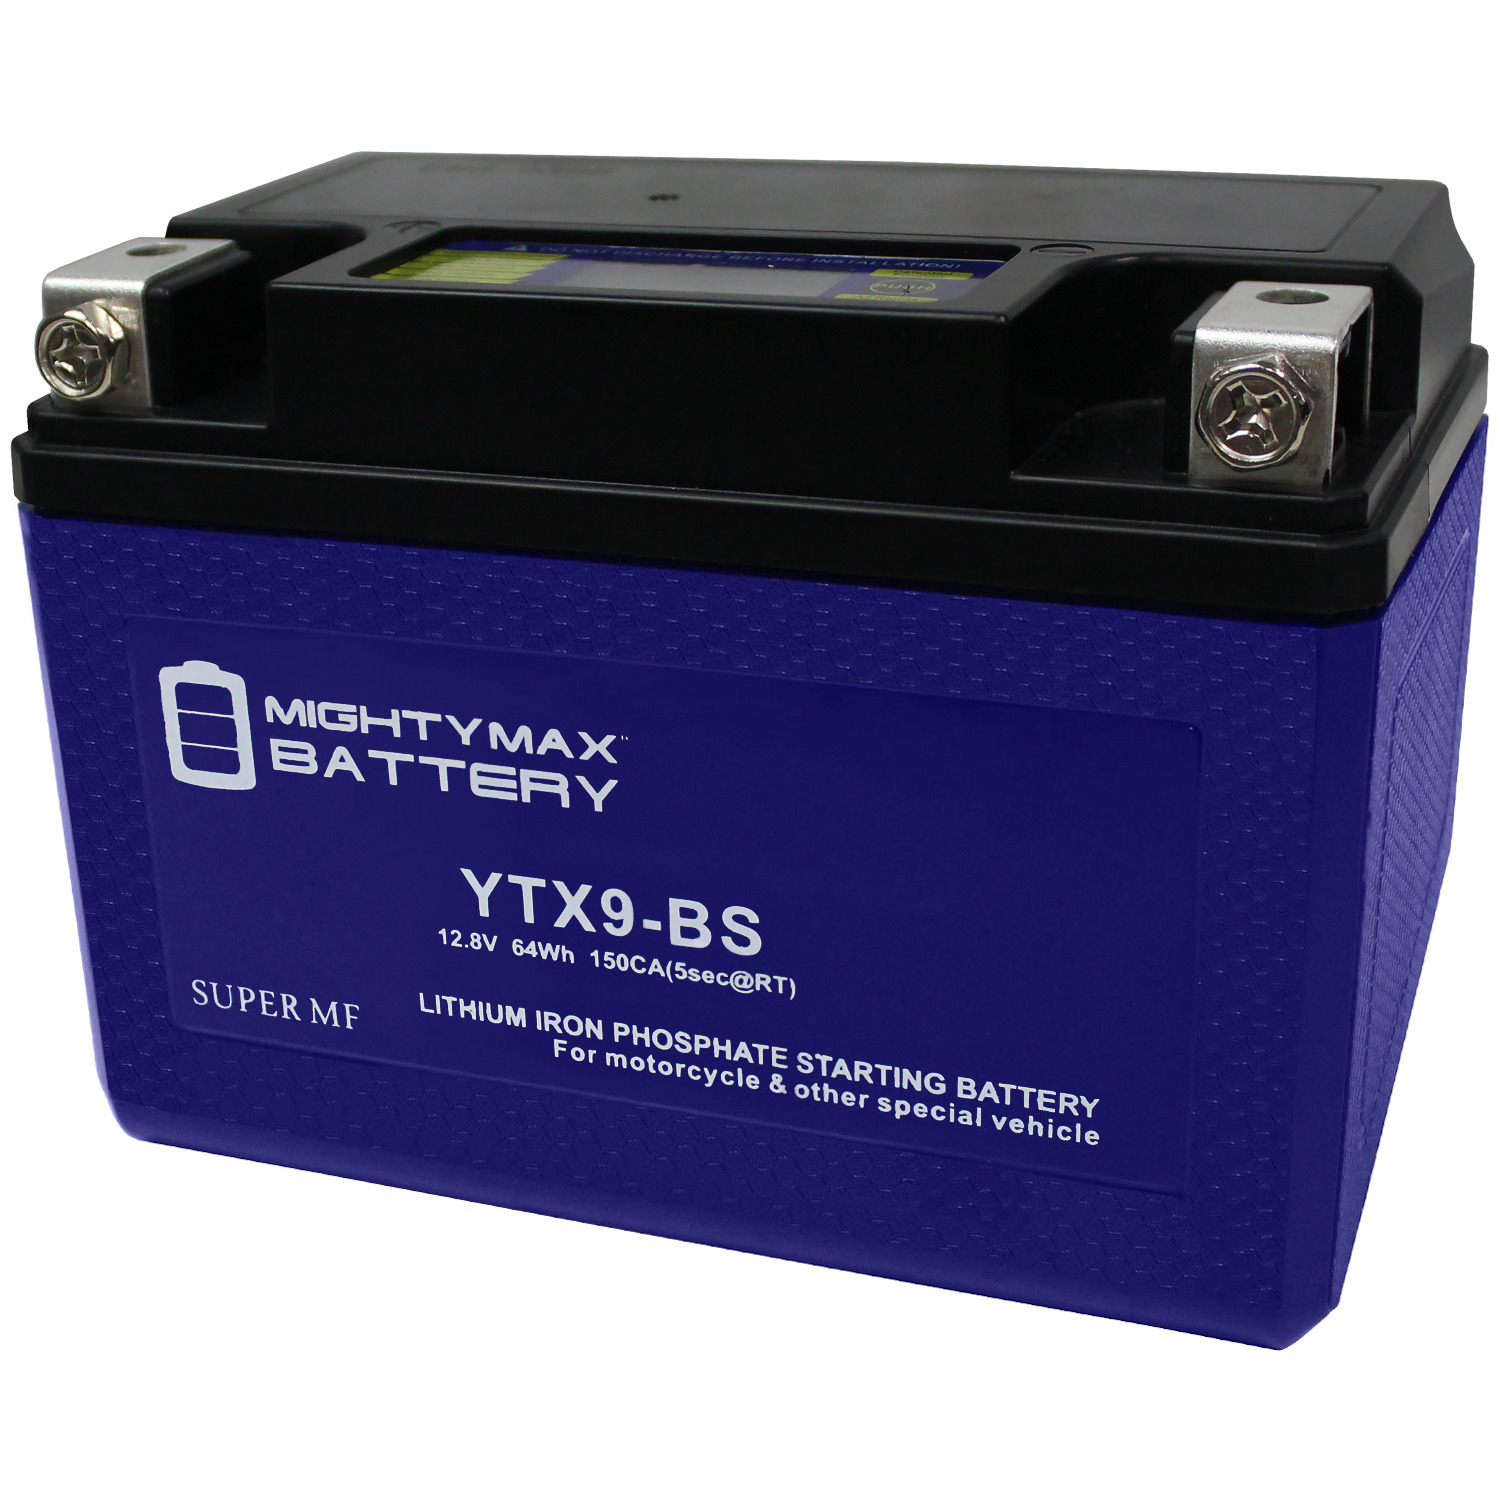 YTX9-BS OEM Size Lithium-ion Phosphate Motorcycle Starter Battery - Energy  Storage System Solutions Provider「POWEROAD」